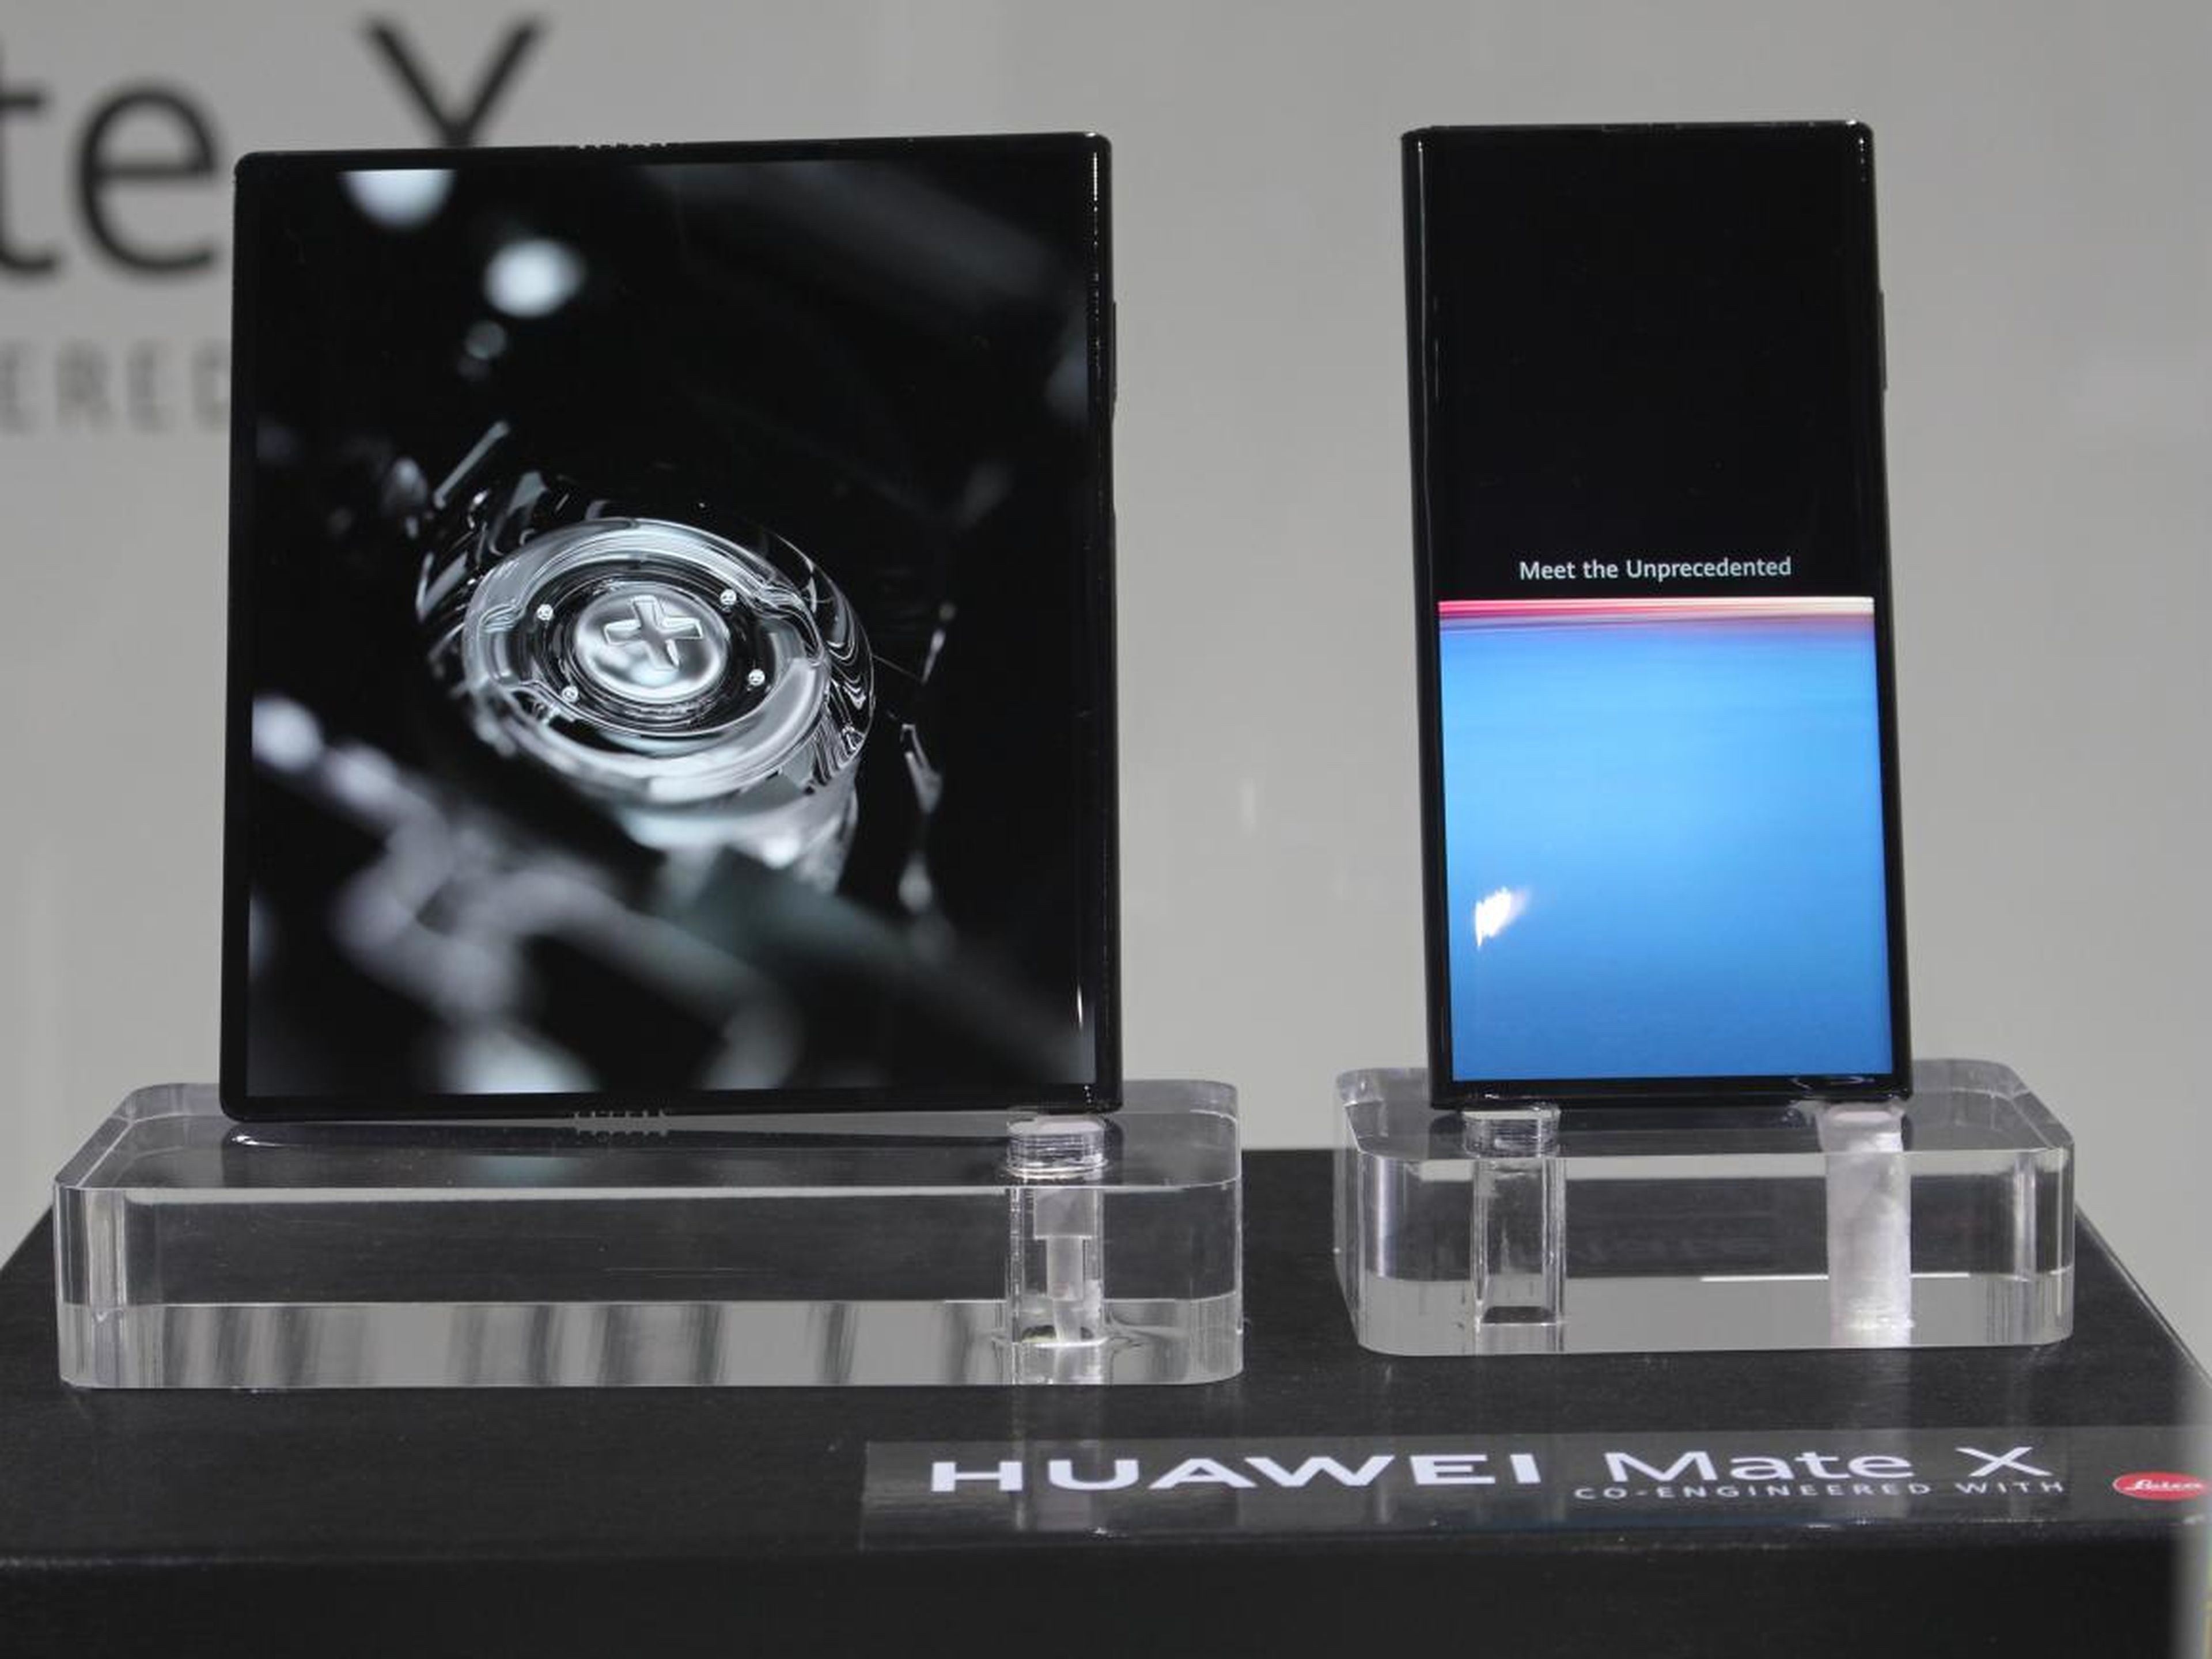 The Mate X runs on Huawei's Kirin 980 chip, and comes with 8GB of RAM and 512GB of storage.